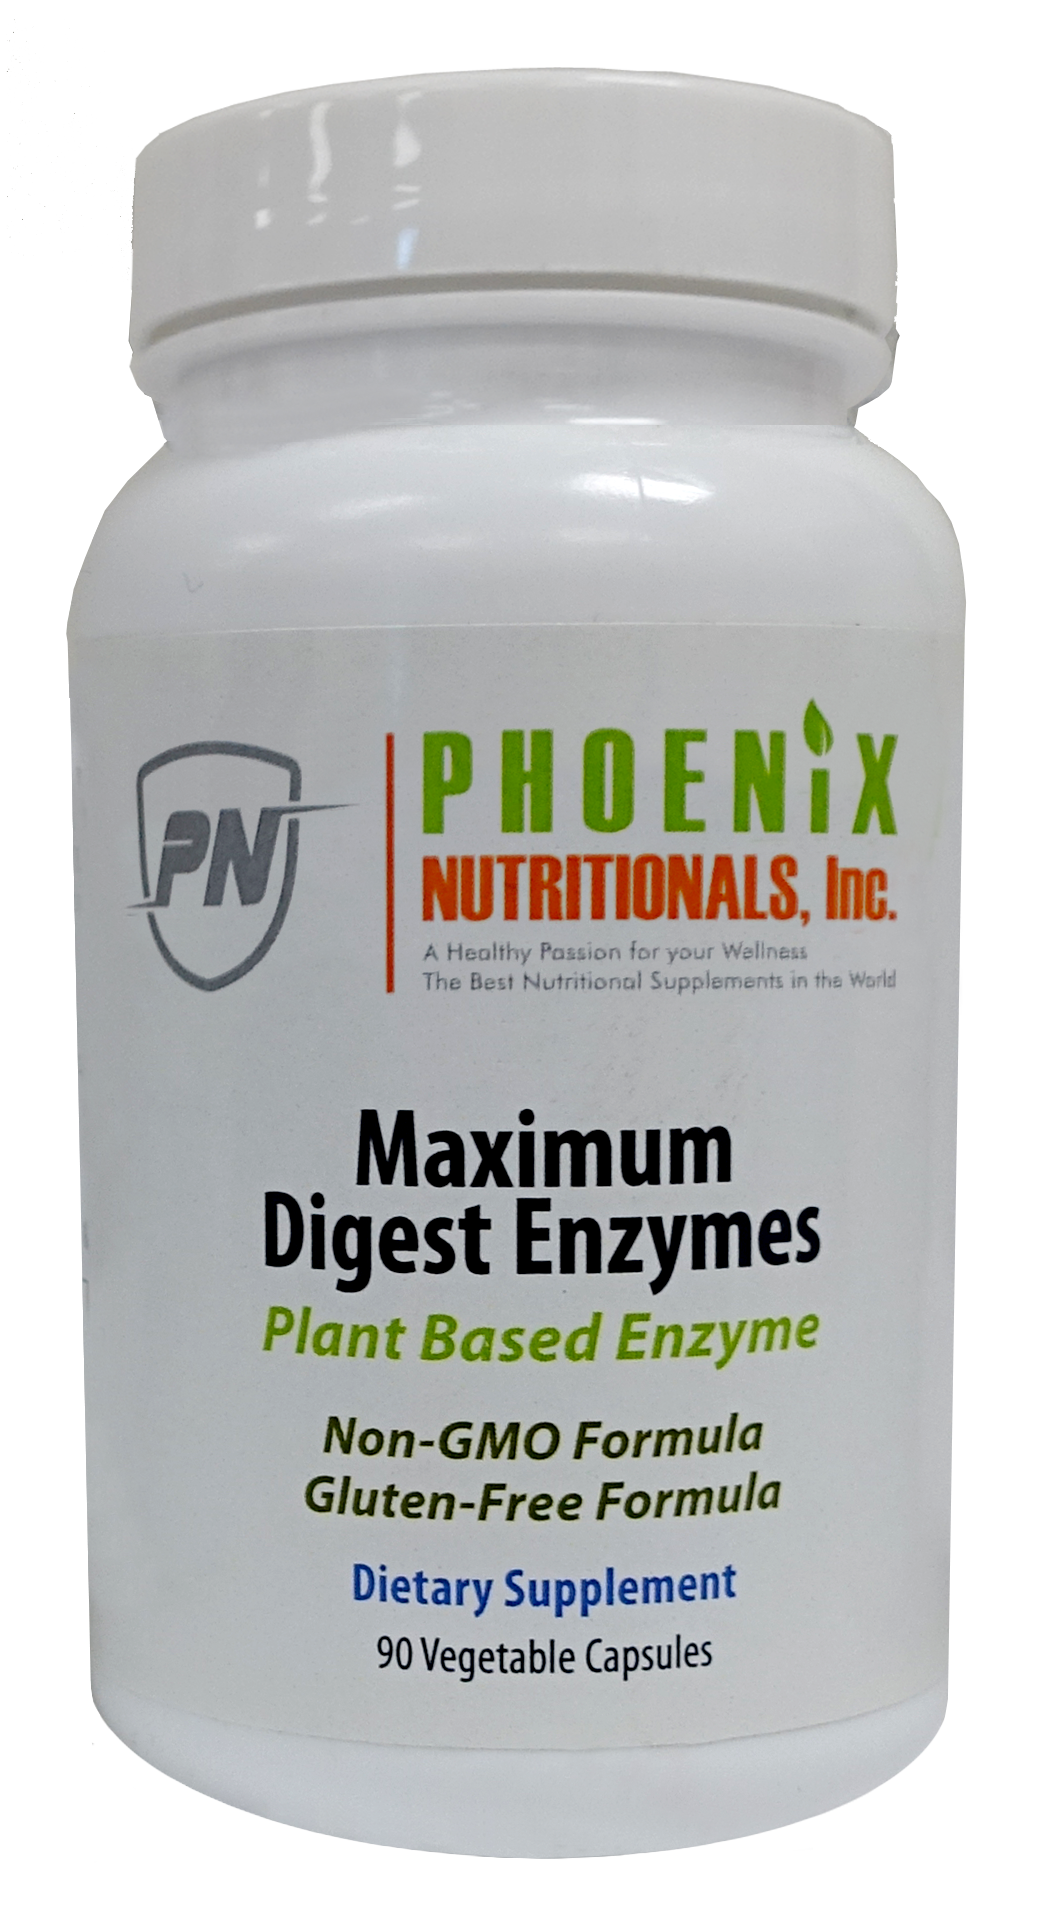 Max Enzyme. Enzymes - Phoenix. Digestive Enzymes. Sam nutritional products Selenium слон.